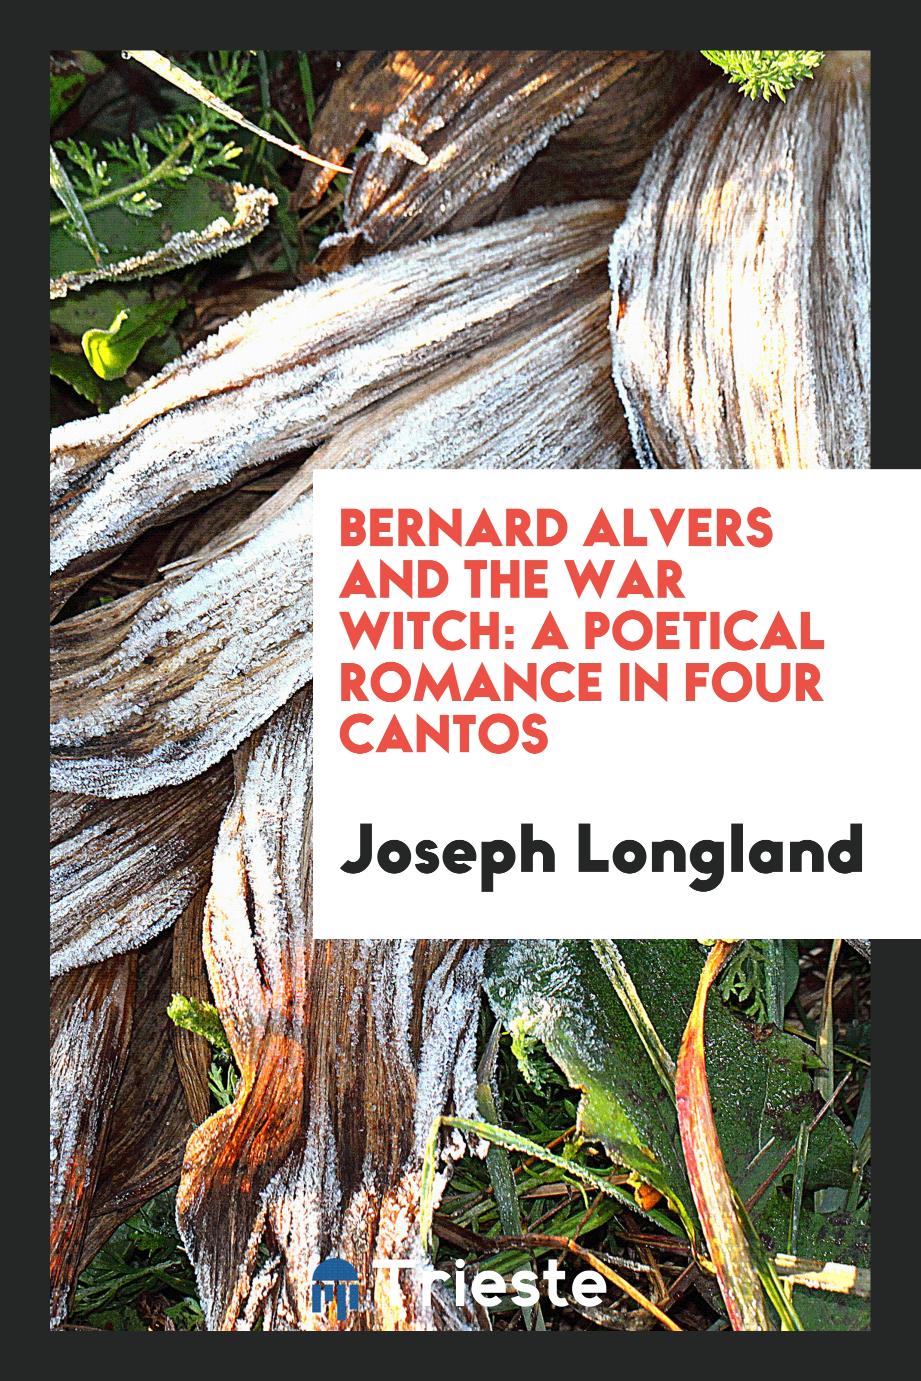 Bernard Alvers and the War Witch: A Poetical Romance in Four Cantos